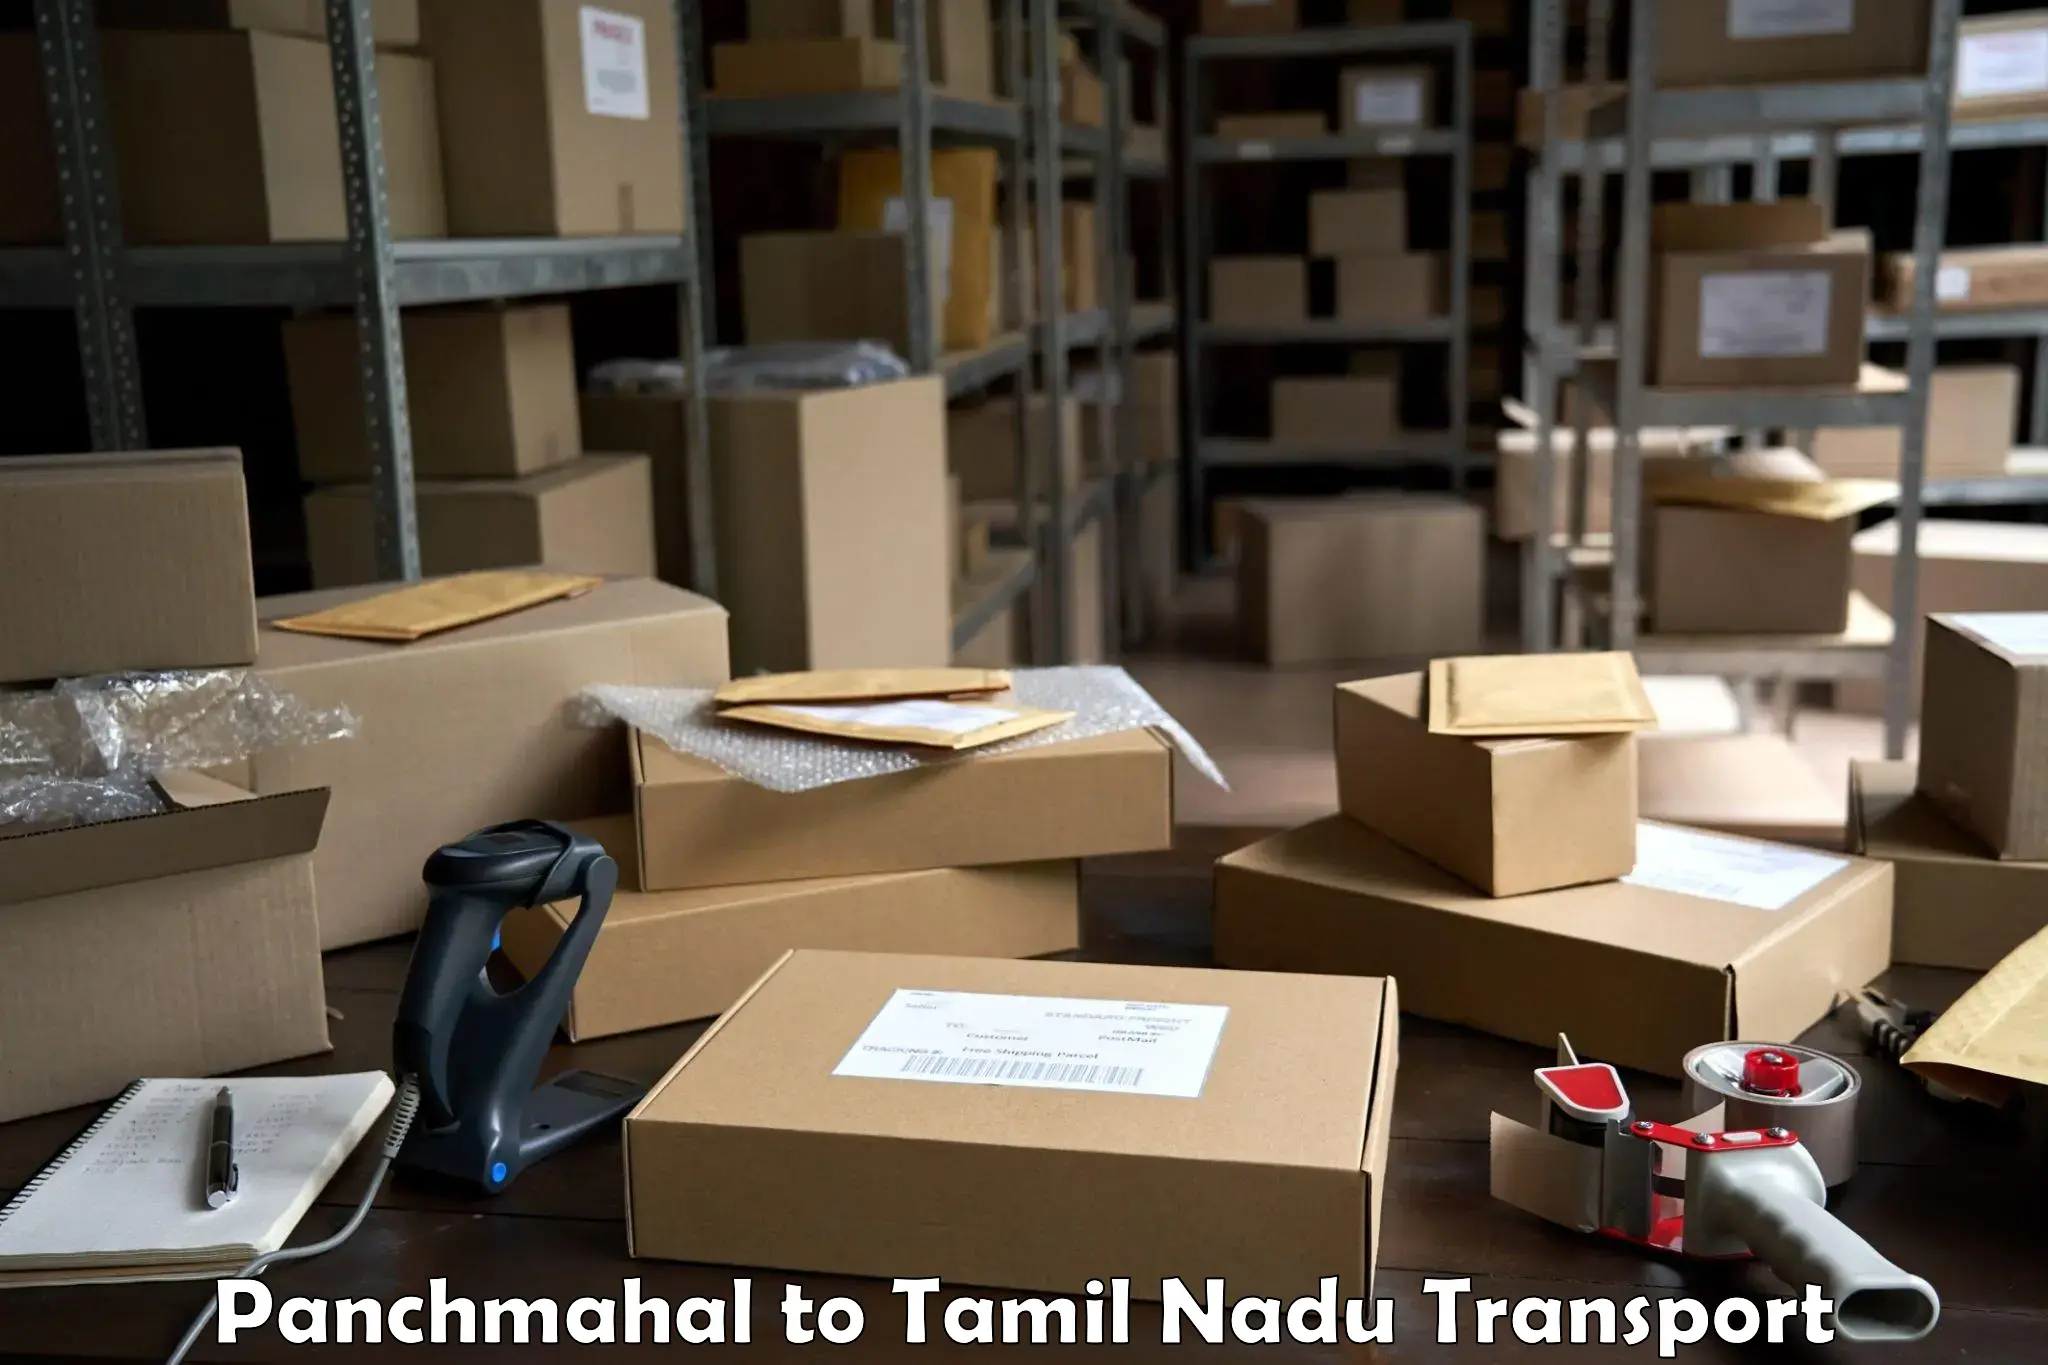 Pick up transport service Panchmahal to Chennai